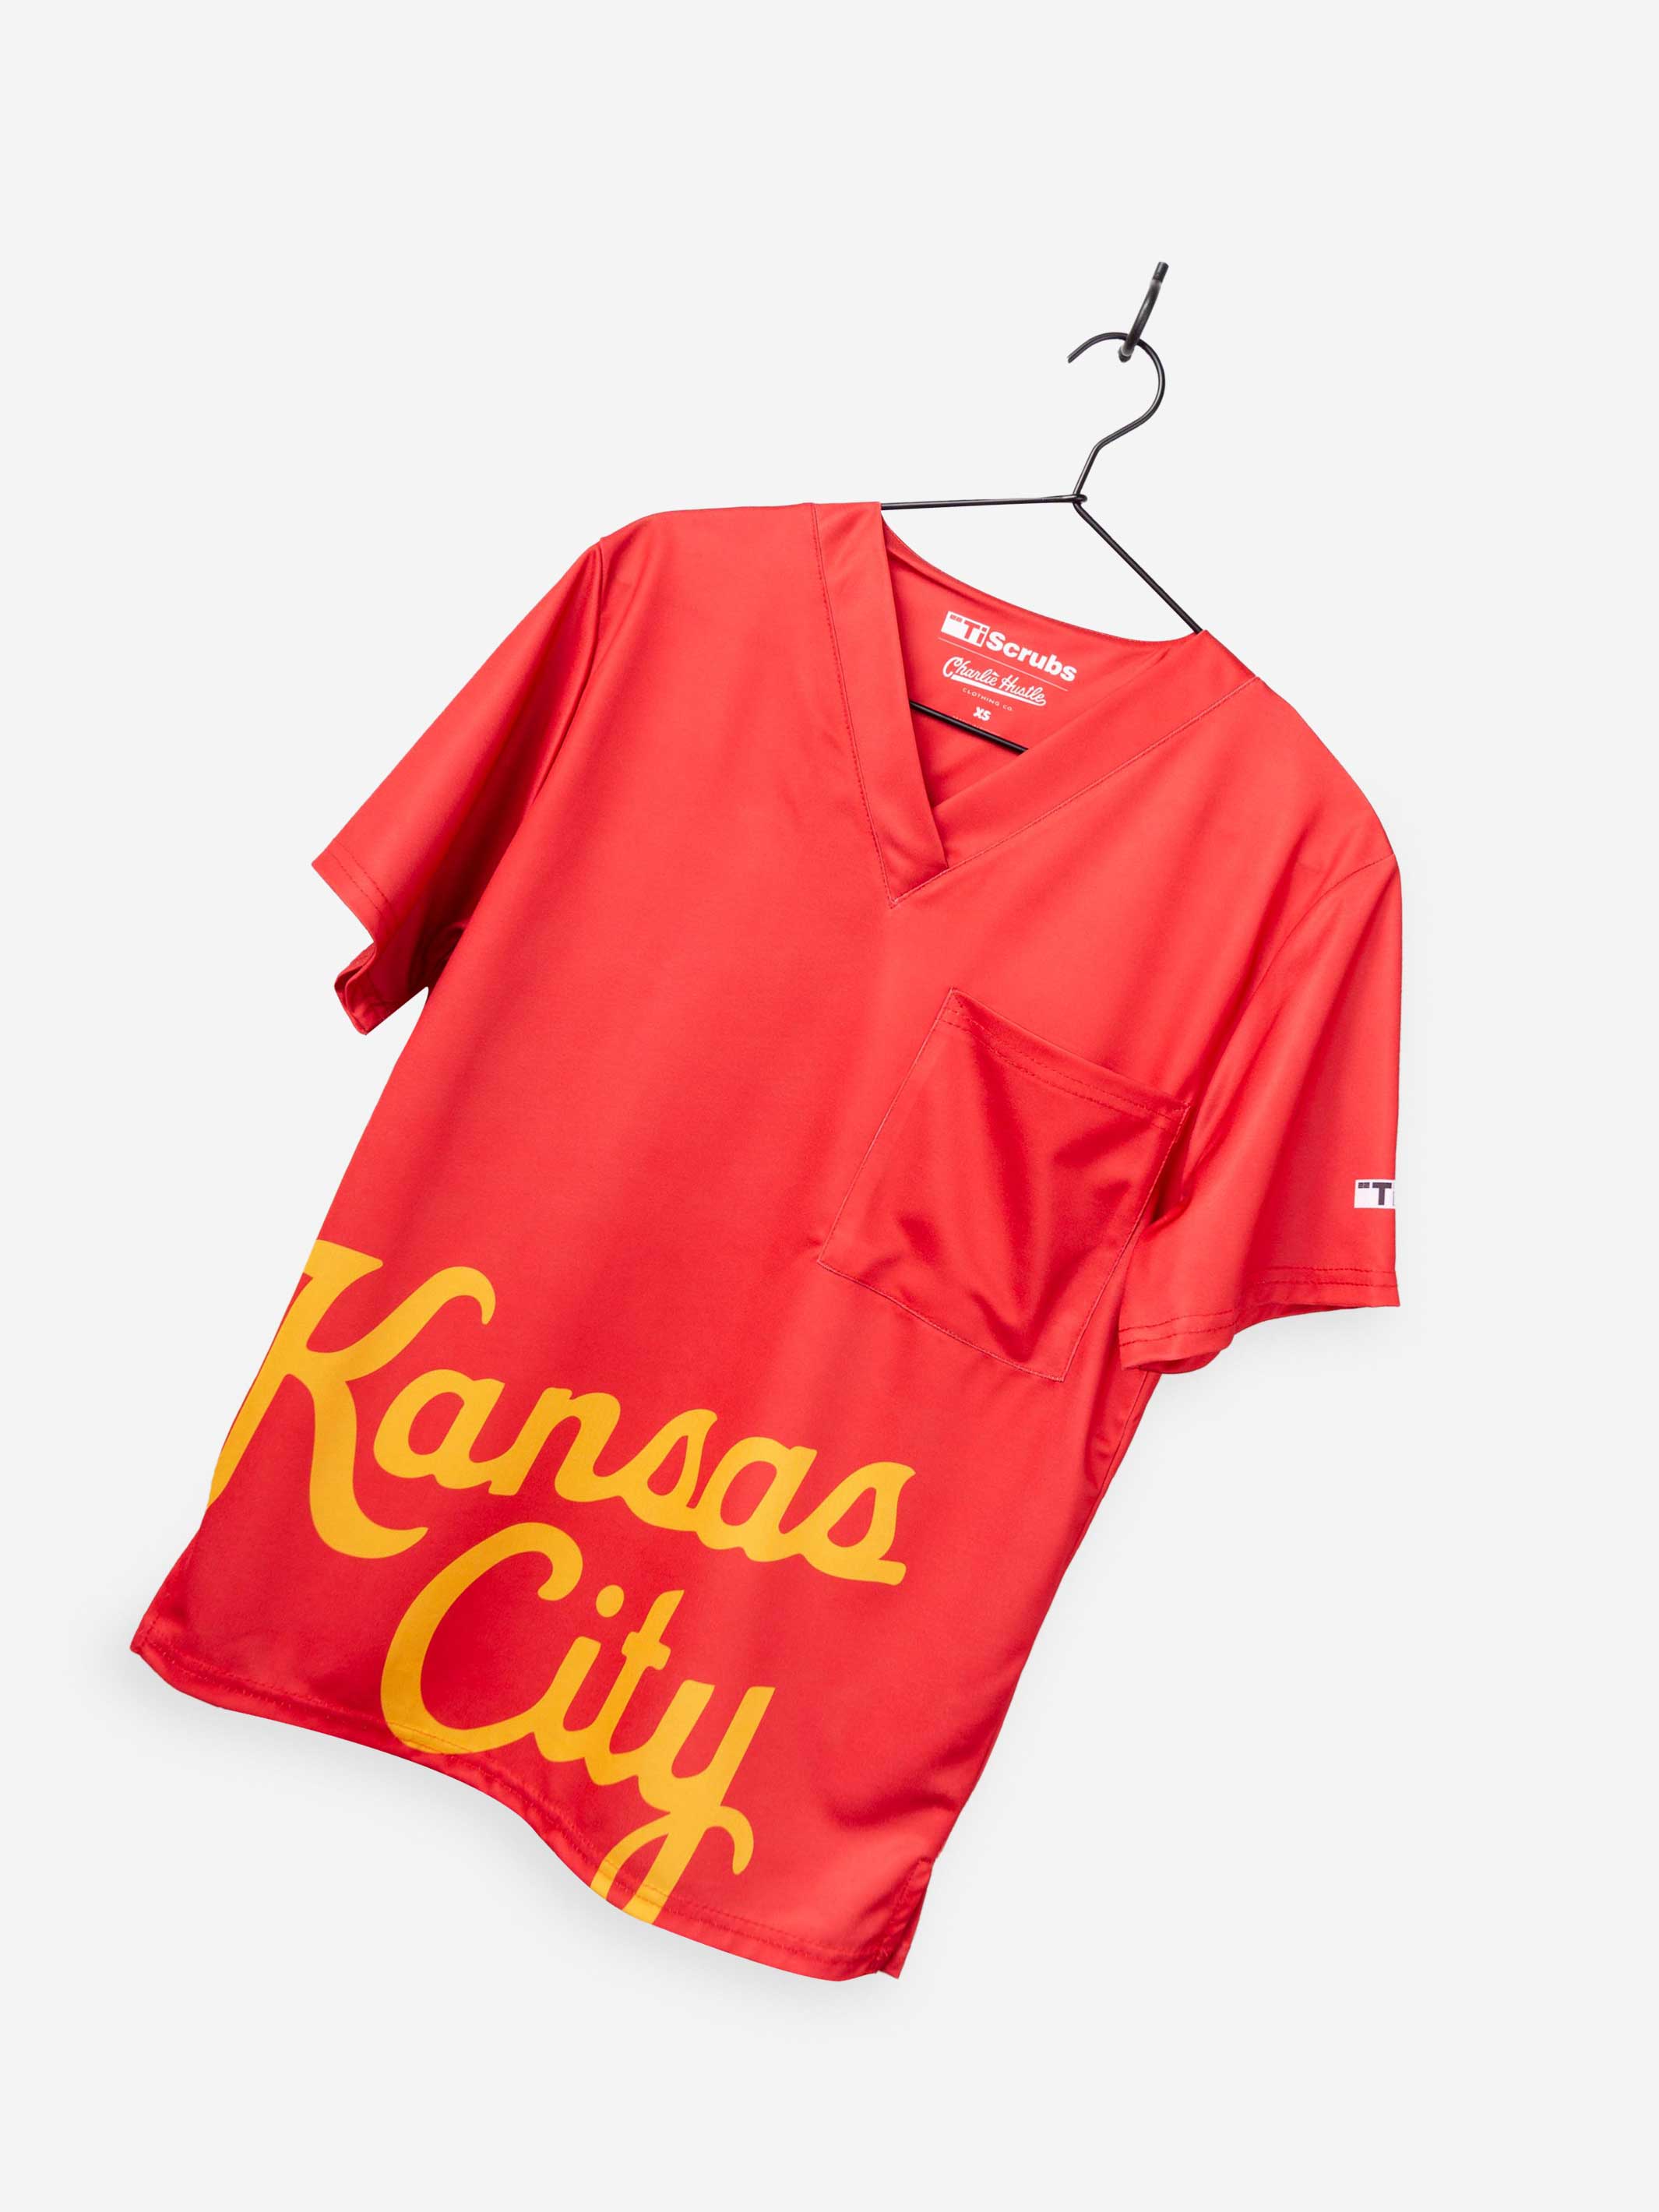 Men&#39;s Charlie Hustle Print Scrub Top with Kansas City Script in Red and Gold in performance stretch fabric